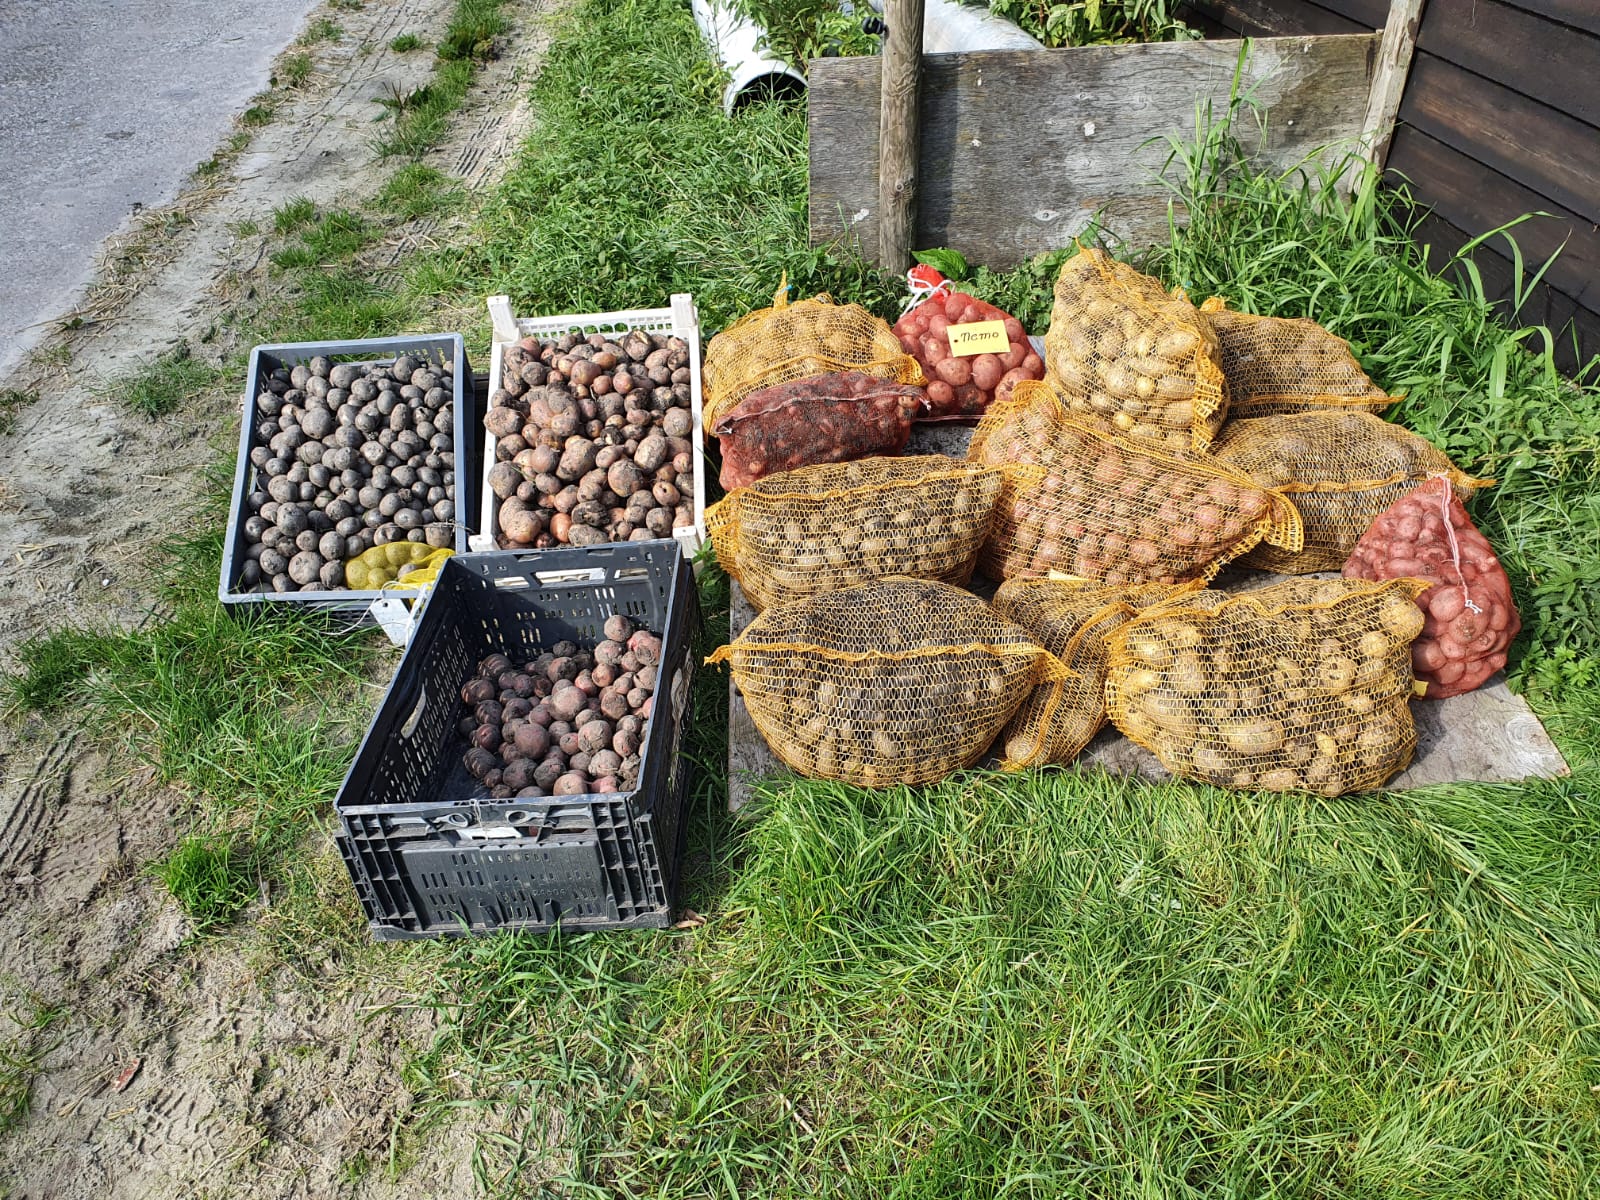 Potatoes in bags and boxes in the grass.